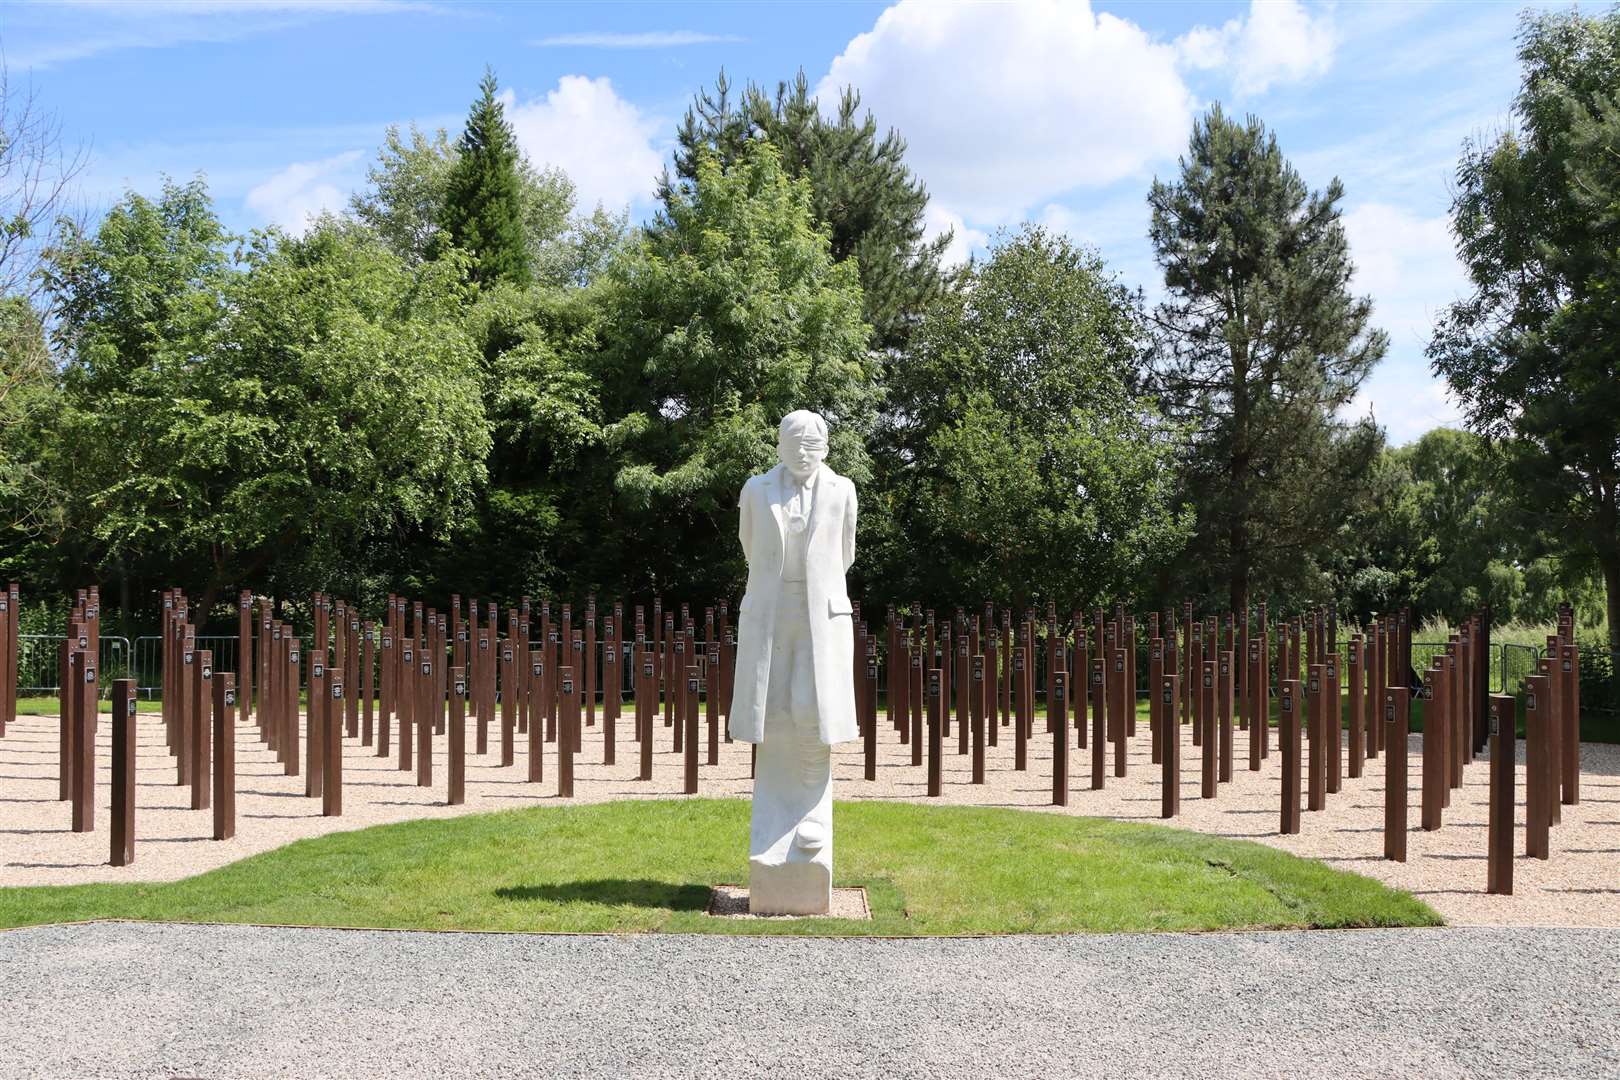 The tribute to 309 soldiers had been damaged by flooding (National Memorial Arboretum/PA)